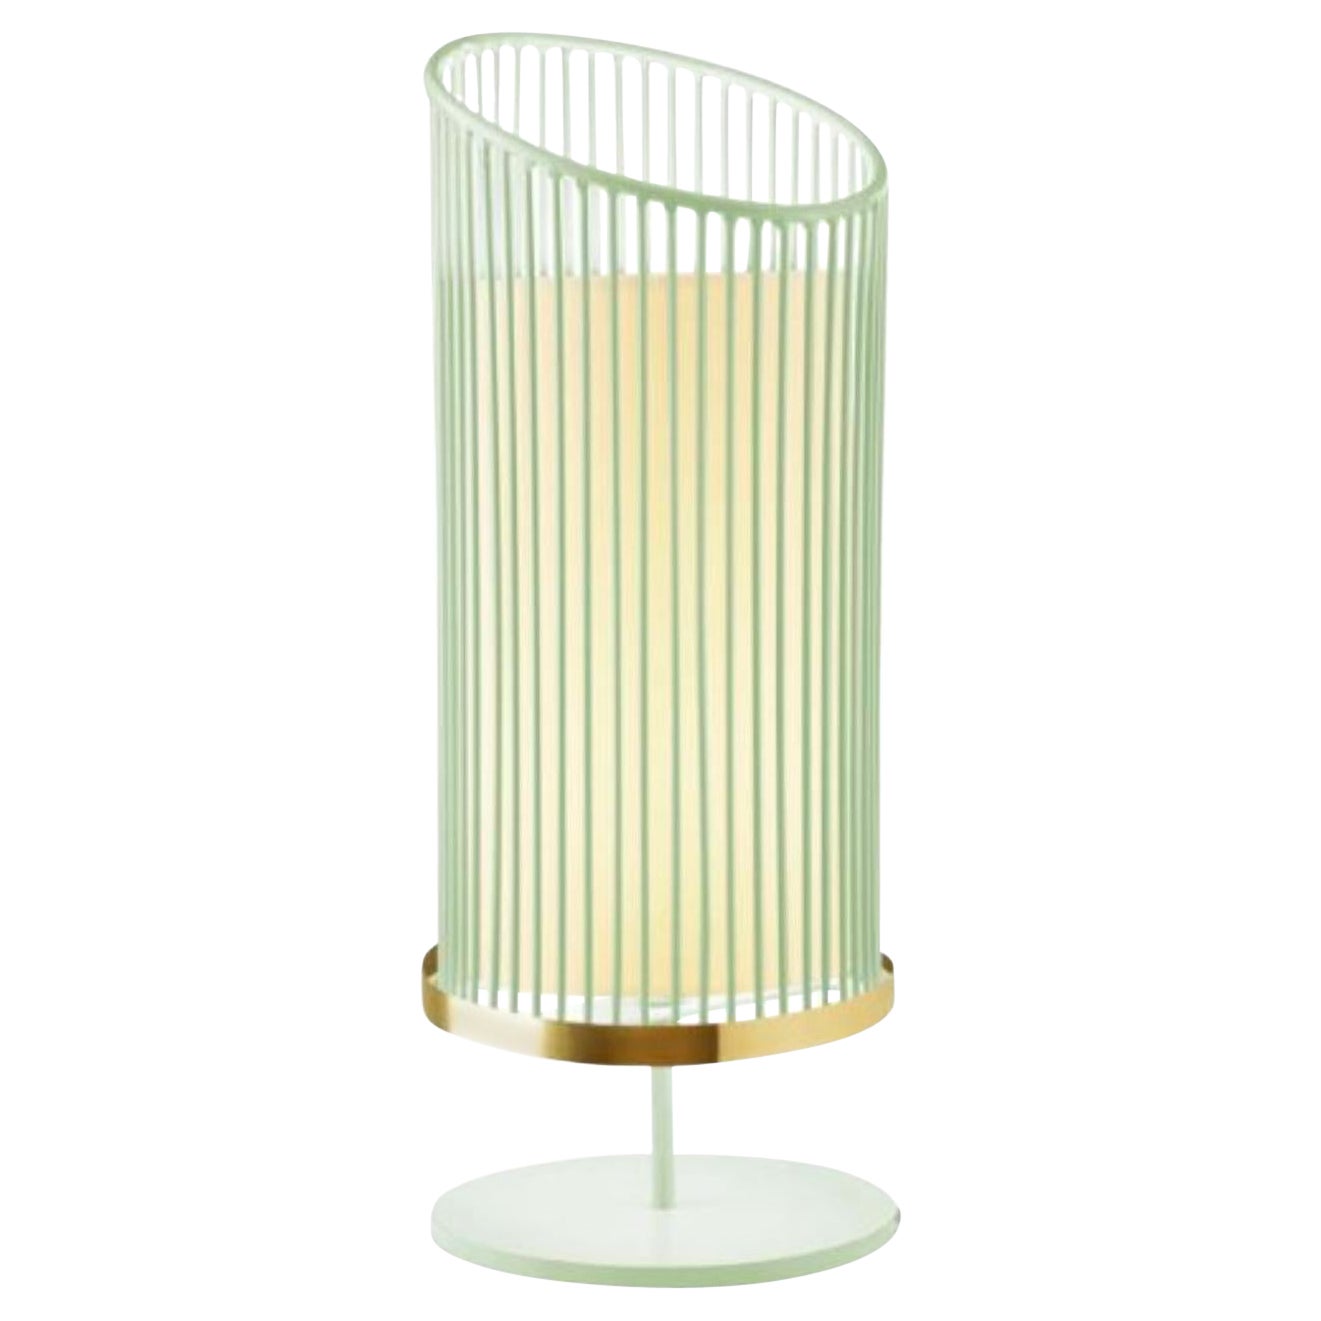 Dream New Spider Table Lamp with Brass Ring by Dooq